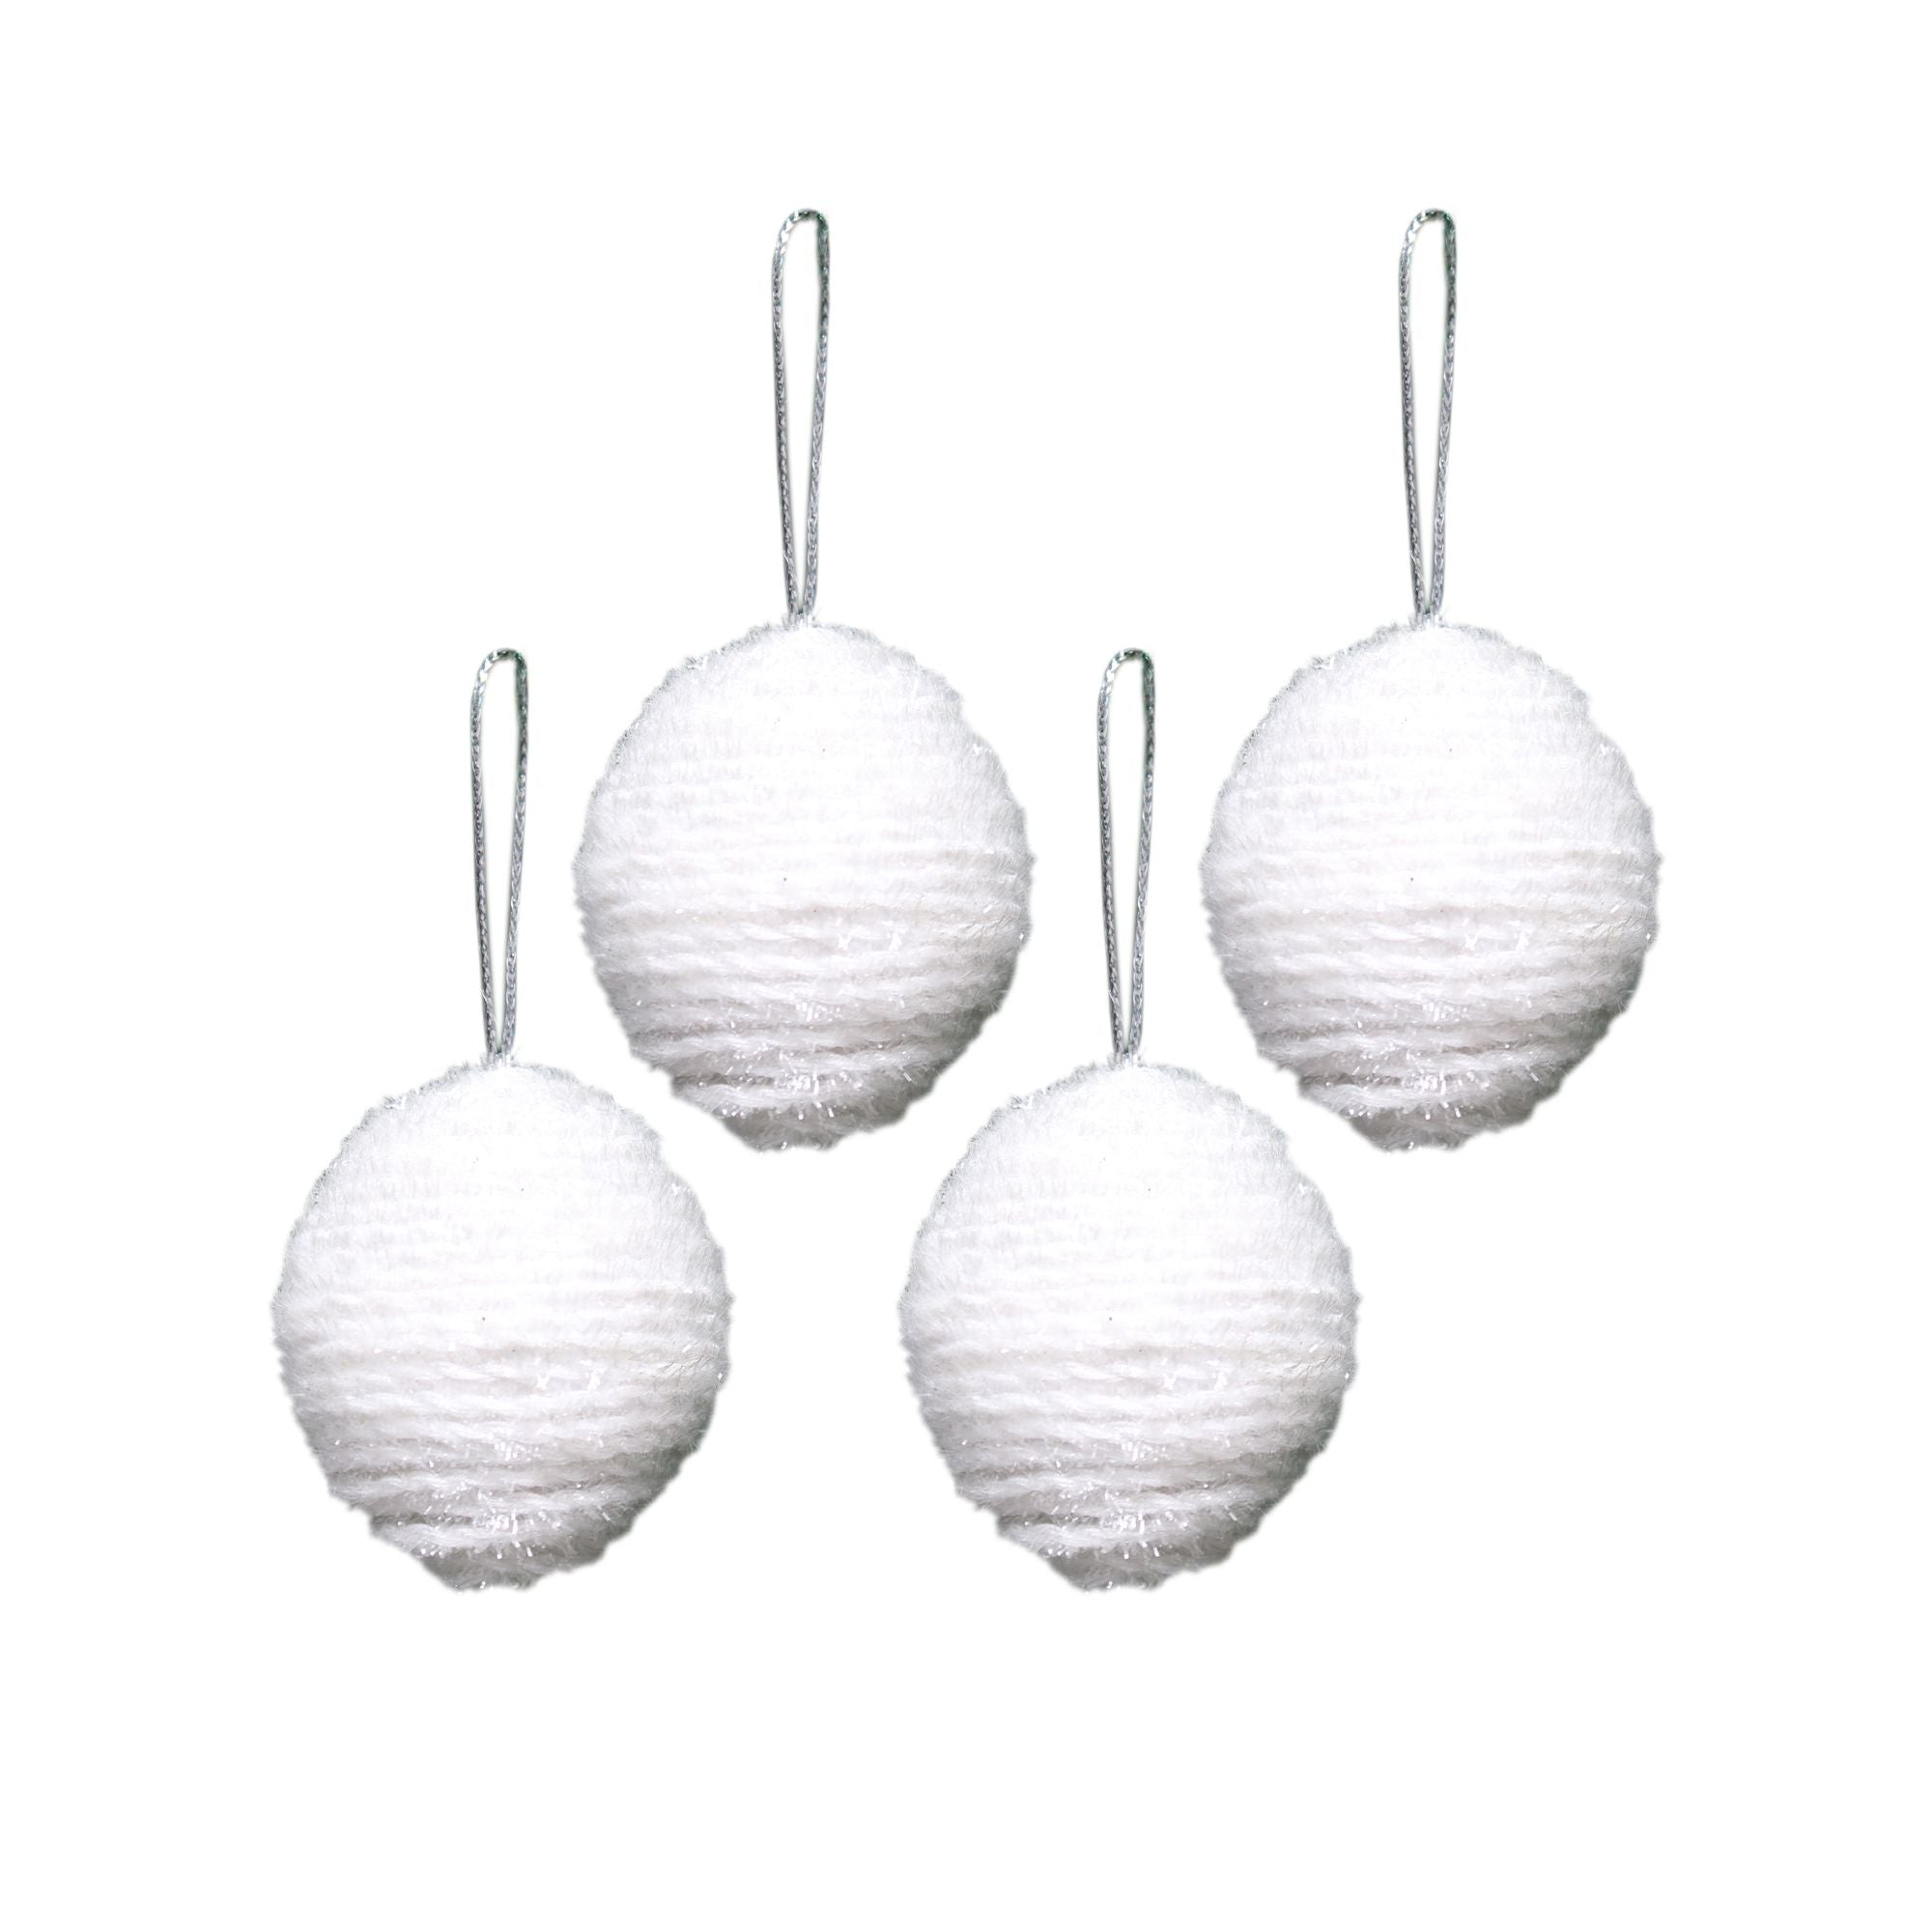 Handmade Christmas Ornaments - Tinsel Baubles, 50mm, Snow White, 4pc